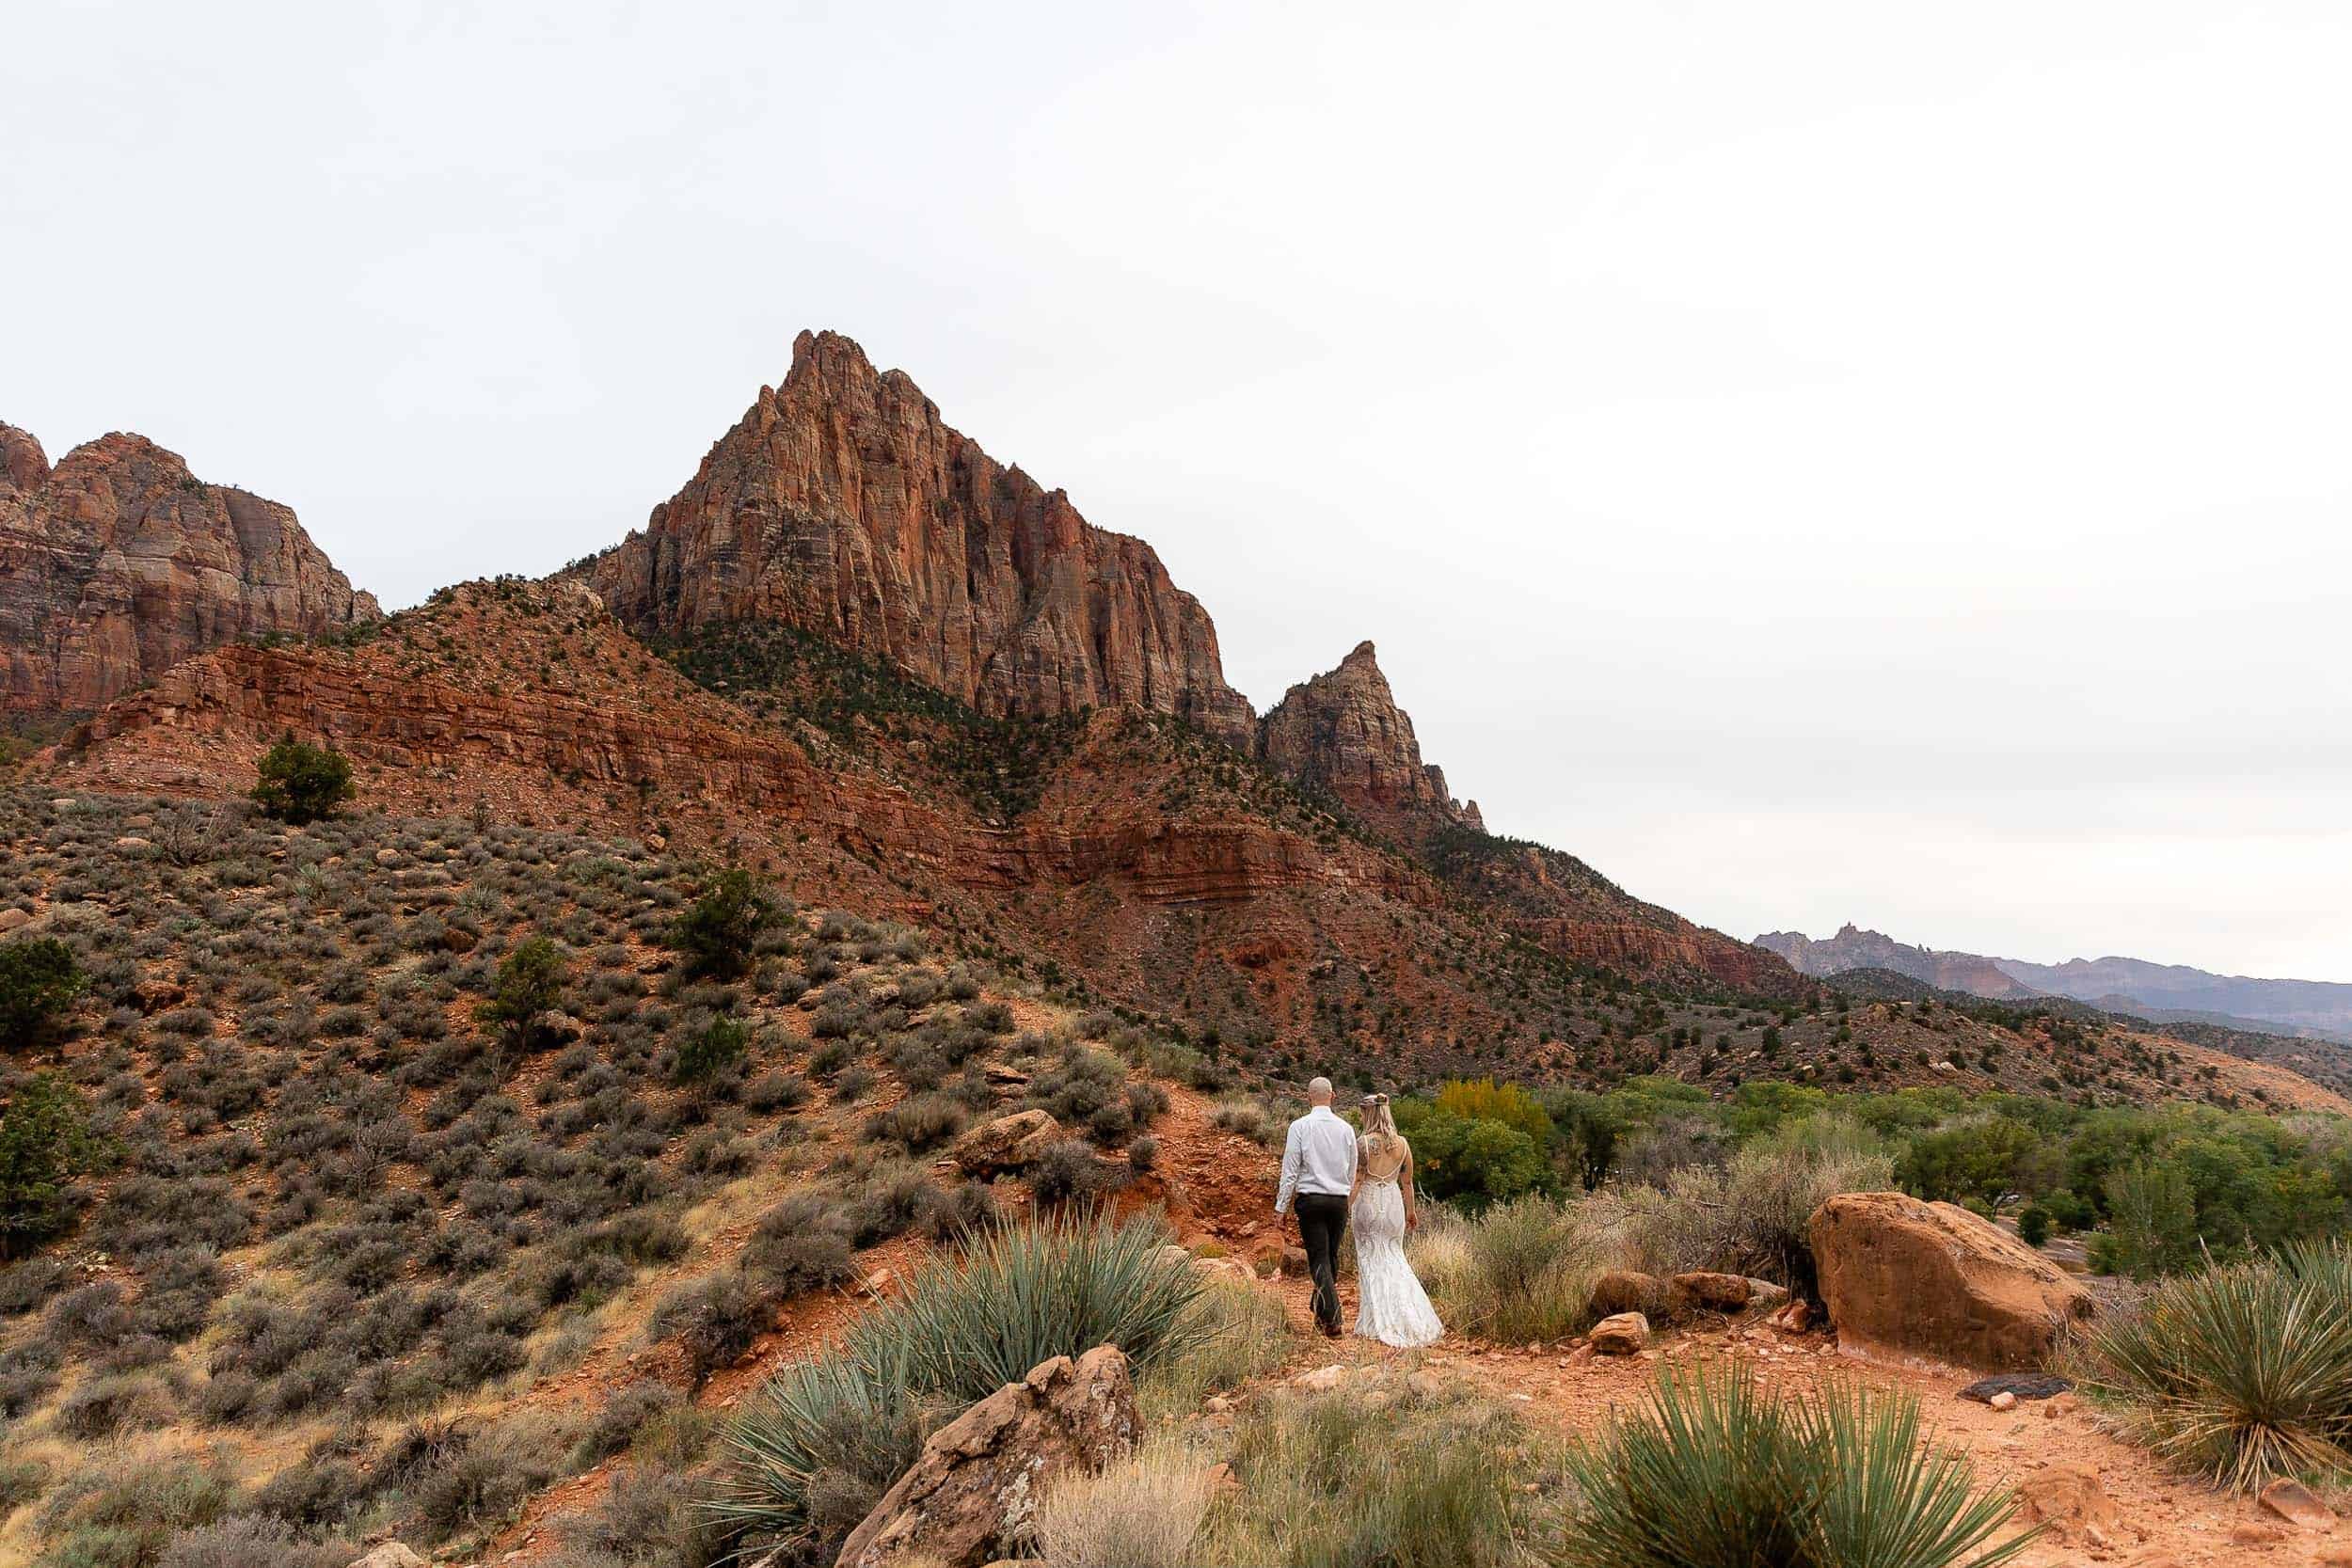 A couple walk along a path with the Watchman peak in Zion in the background